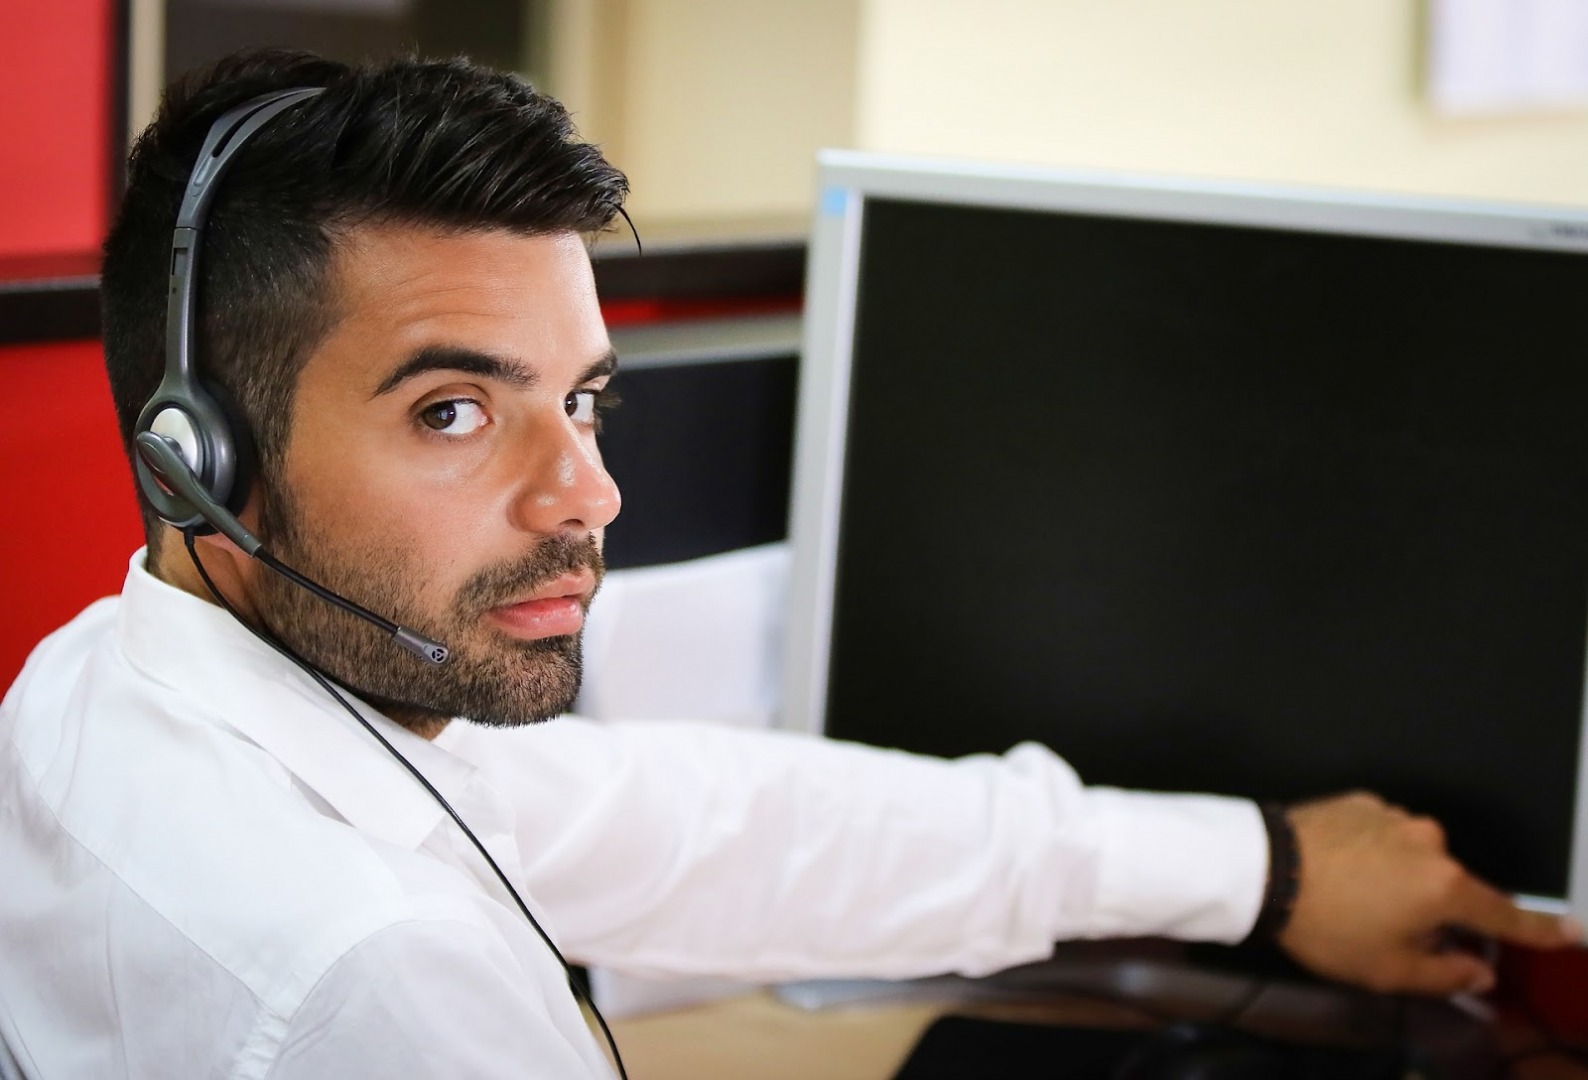 Hire the Right Call Center for Your Business With These Tips